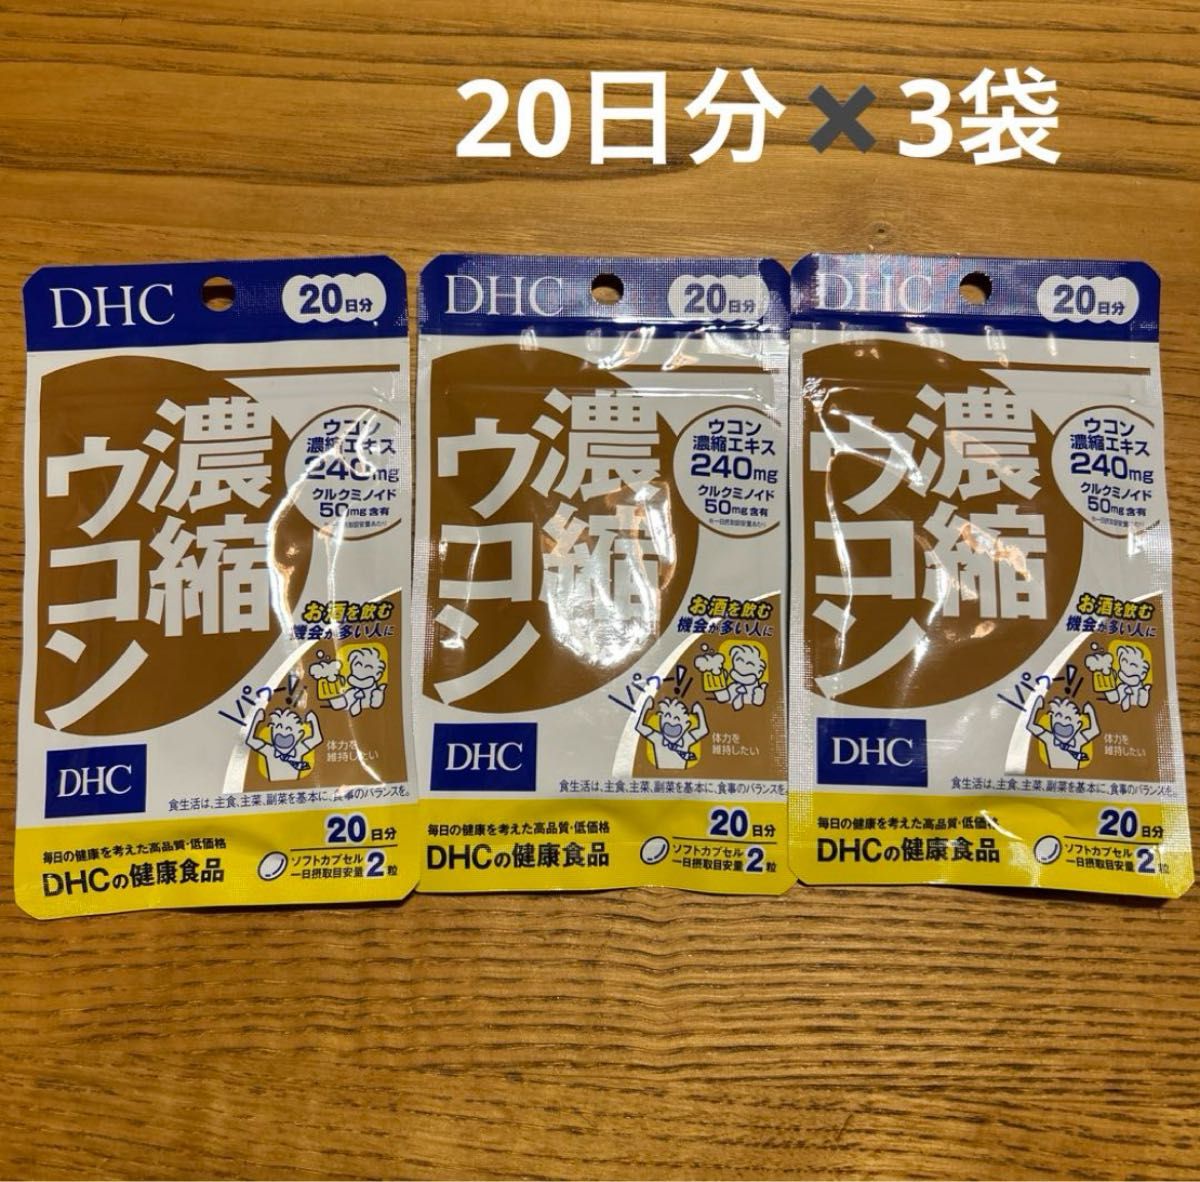 DHC 濃縮ウコン20日分40粒　3袋